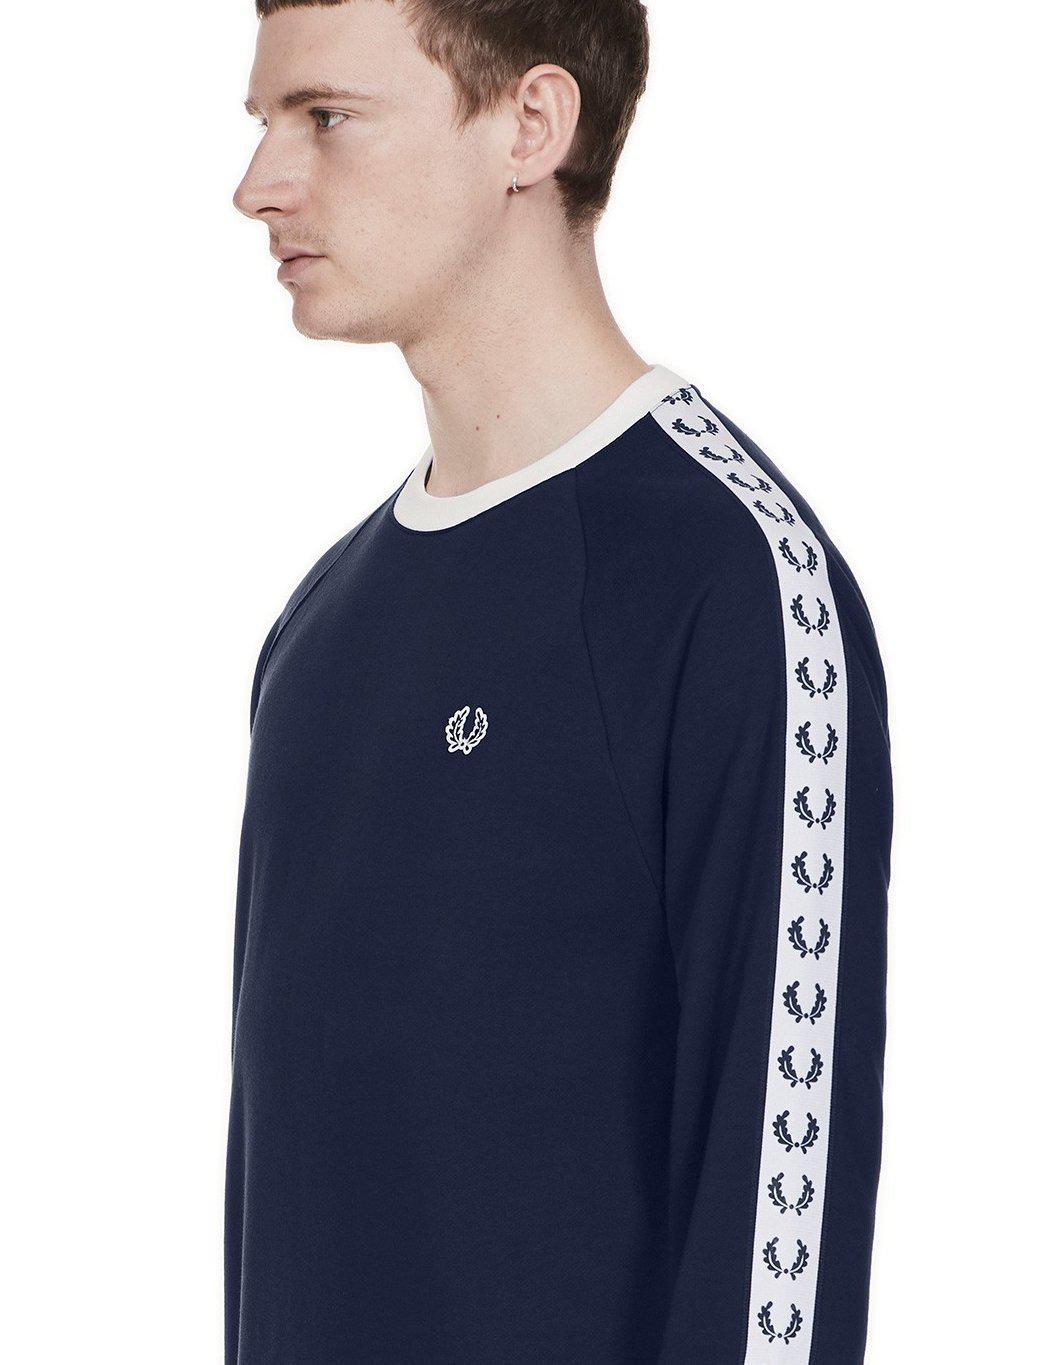 fred perry taped crew neck sweatshirt